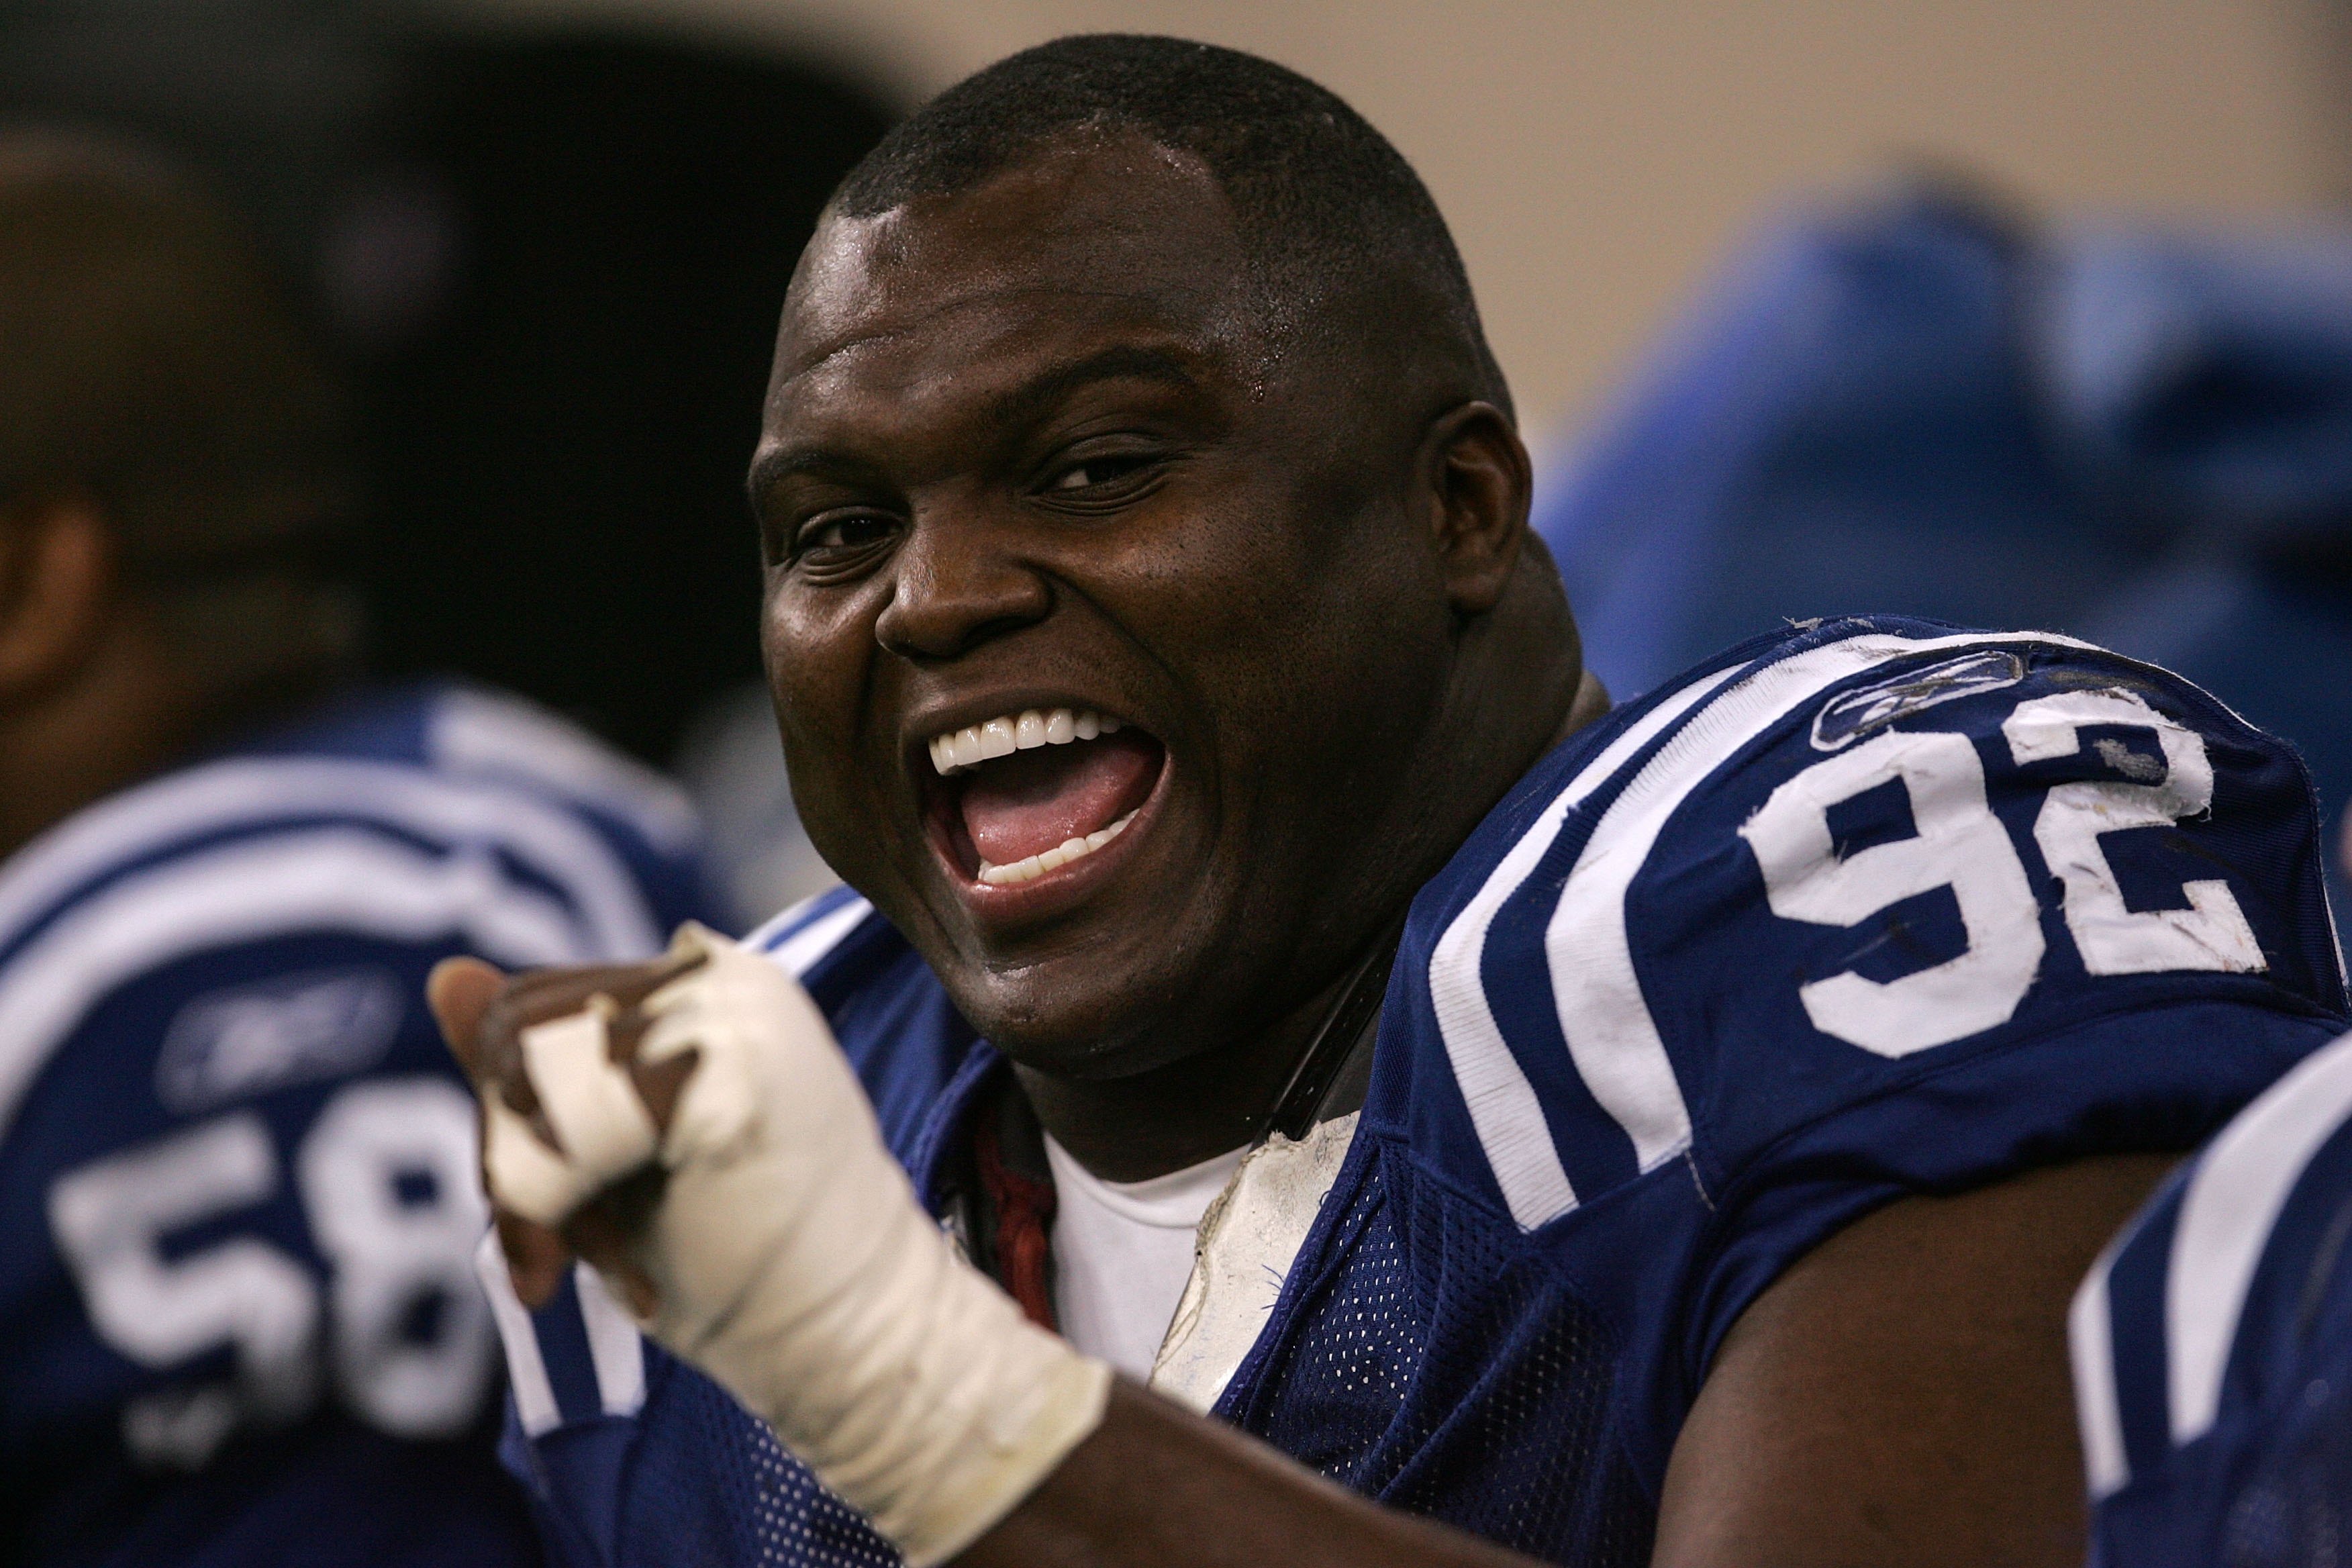 INDIANAPOLIS - NOVEMBER 26:  Anthony McFarland #92 of the Indianapolis Colts smiles on the sideline against the Philadelphia Eagles November 26, 2006 at the RCA Dome in Indianapolis, Indiana.  (Photo by Jonathan Daniel/Getty Images)